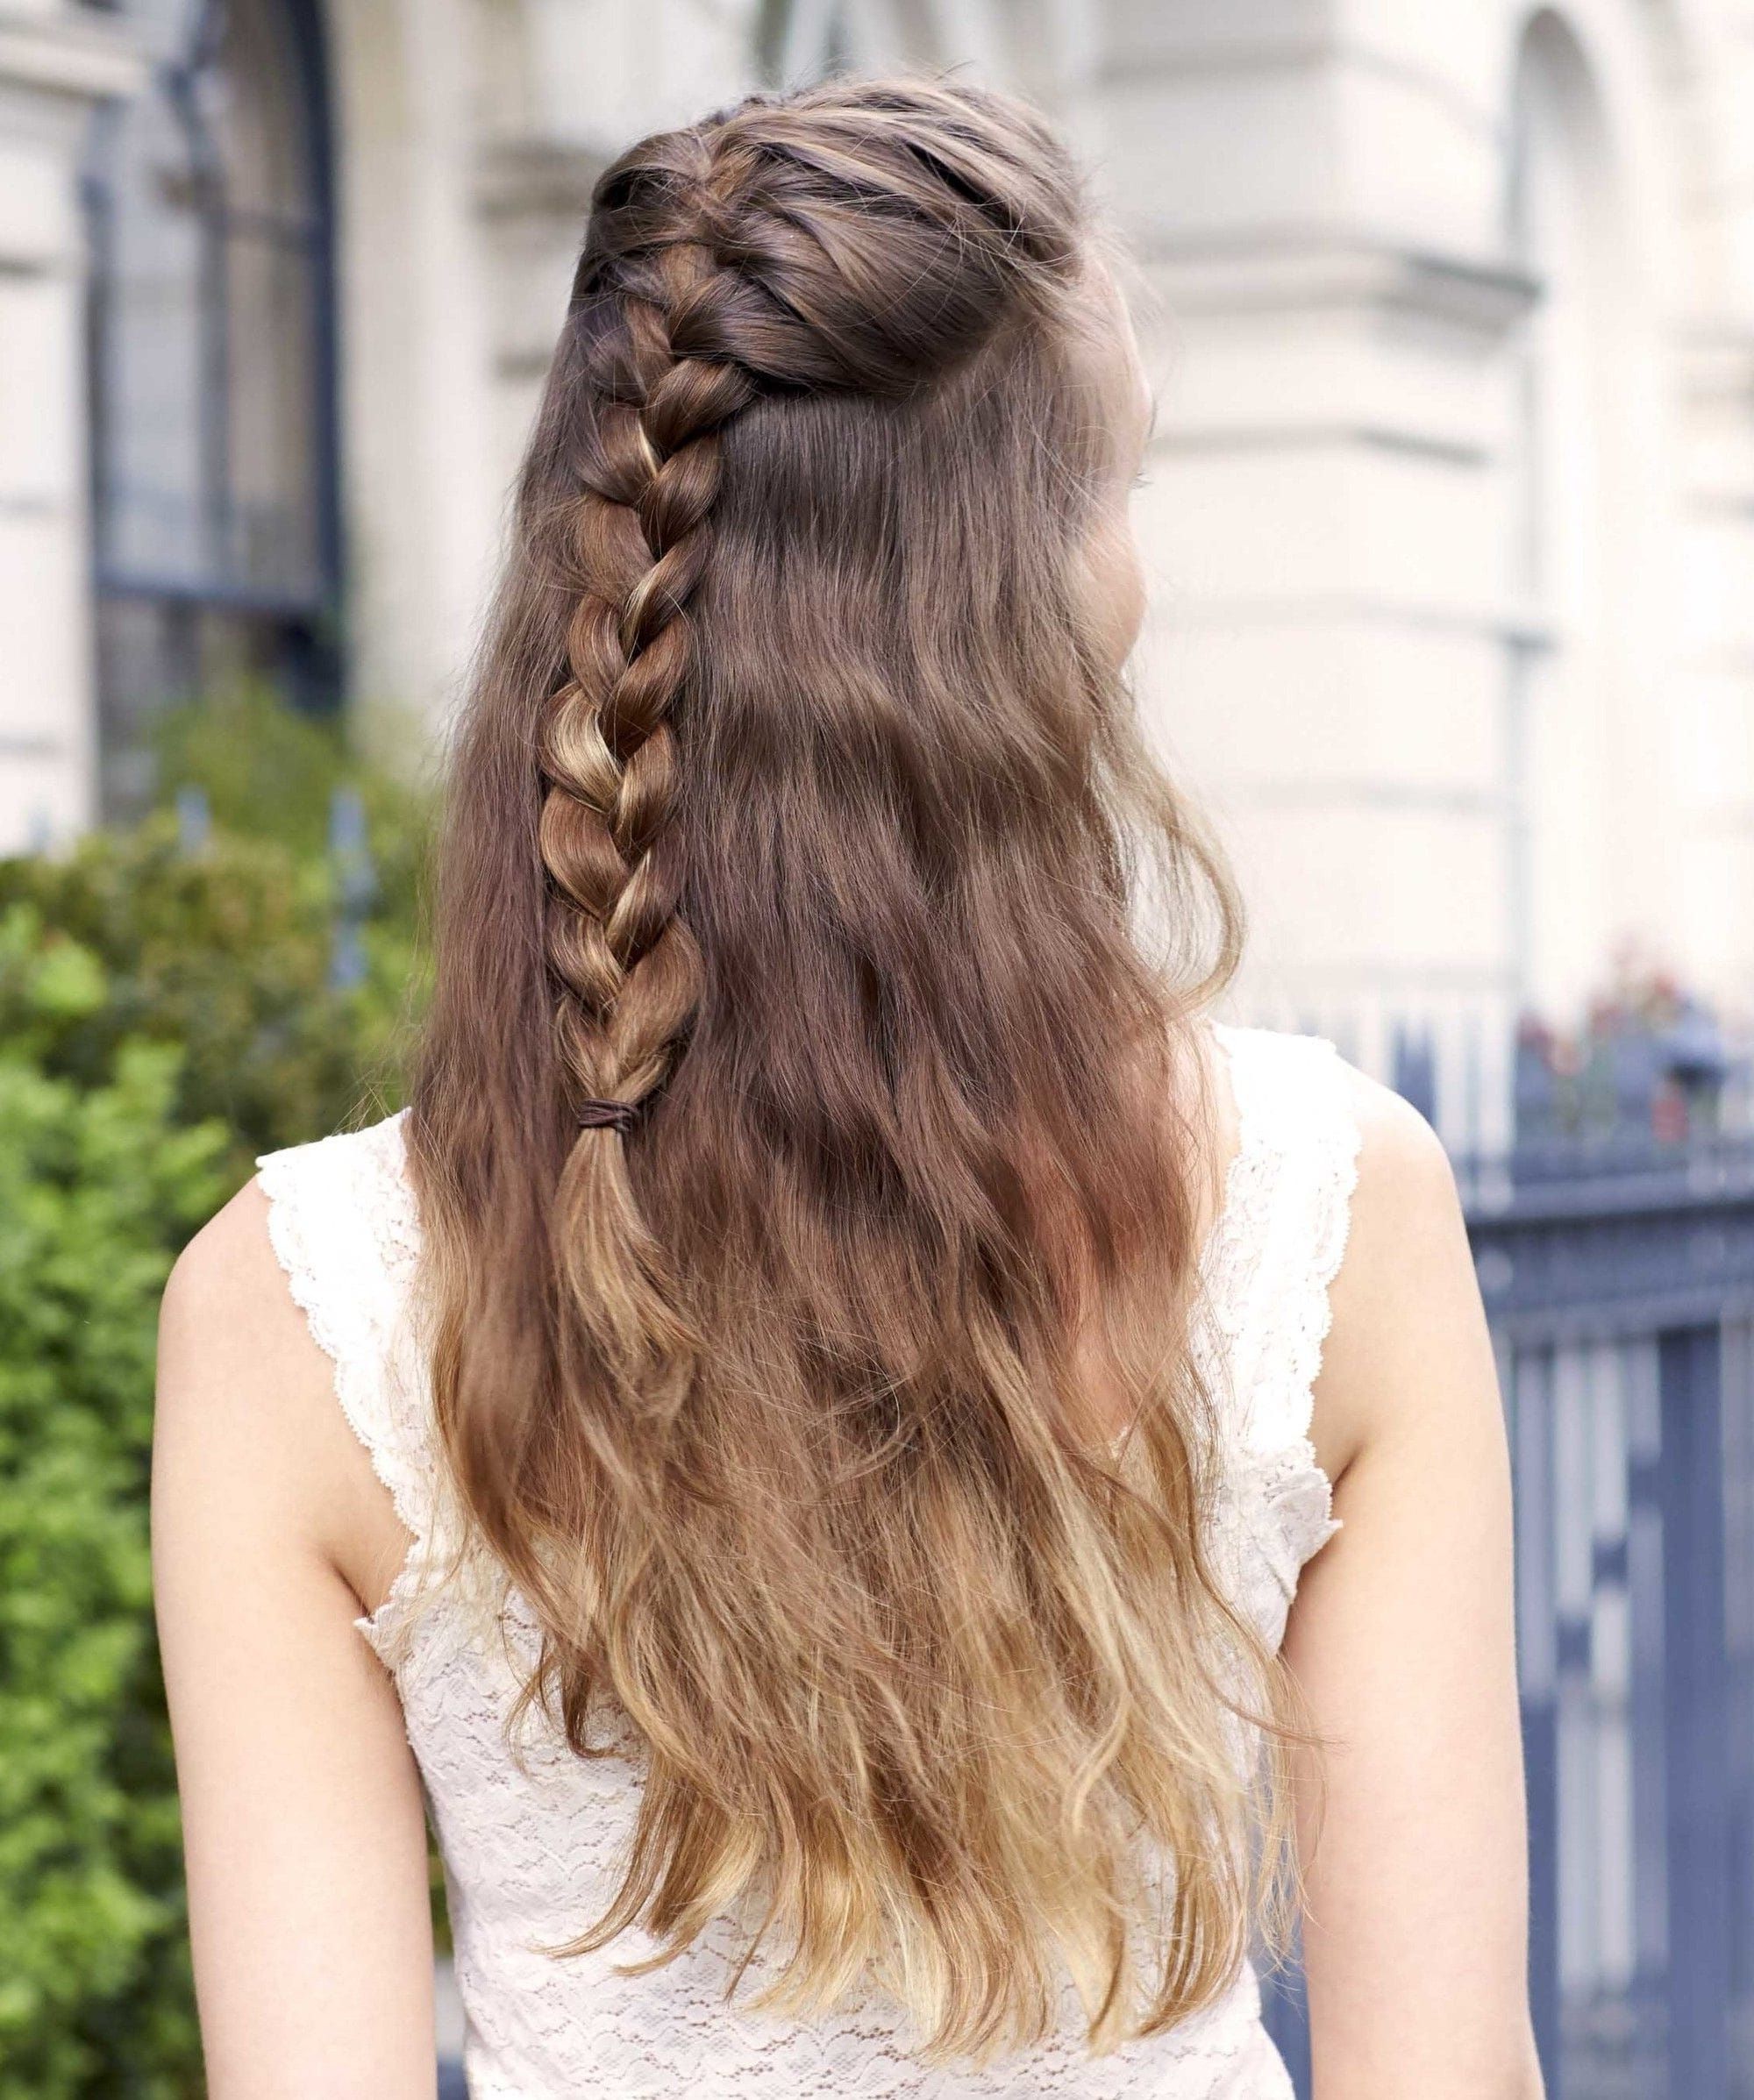 Popular Braided Millennial Pink Pony Hairstyles Within Half Braided Hairstyles: 44 Pretty, Super Flattering Looks (View 10 of 20)